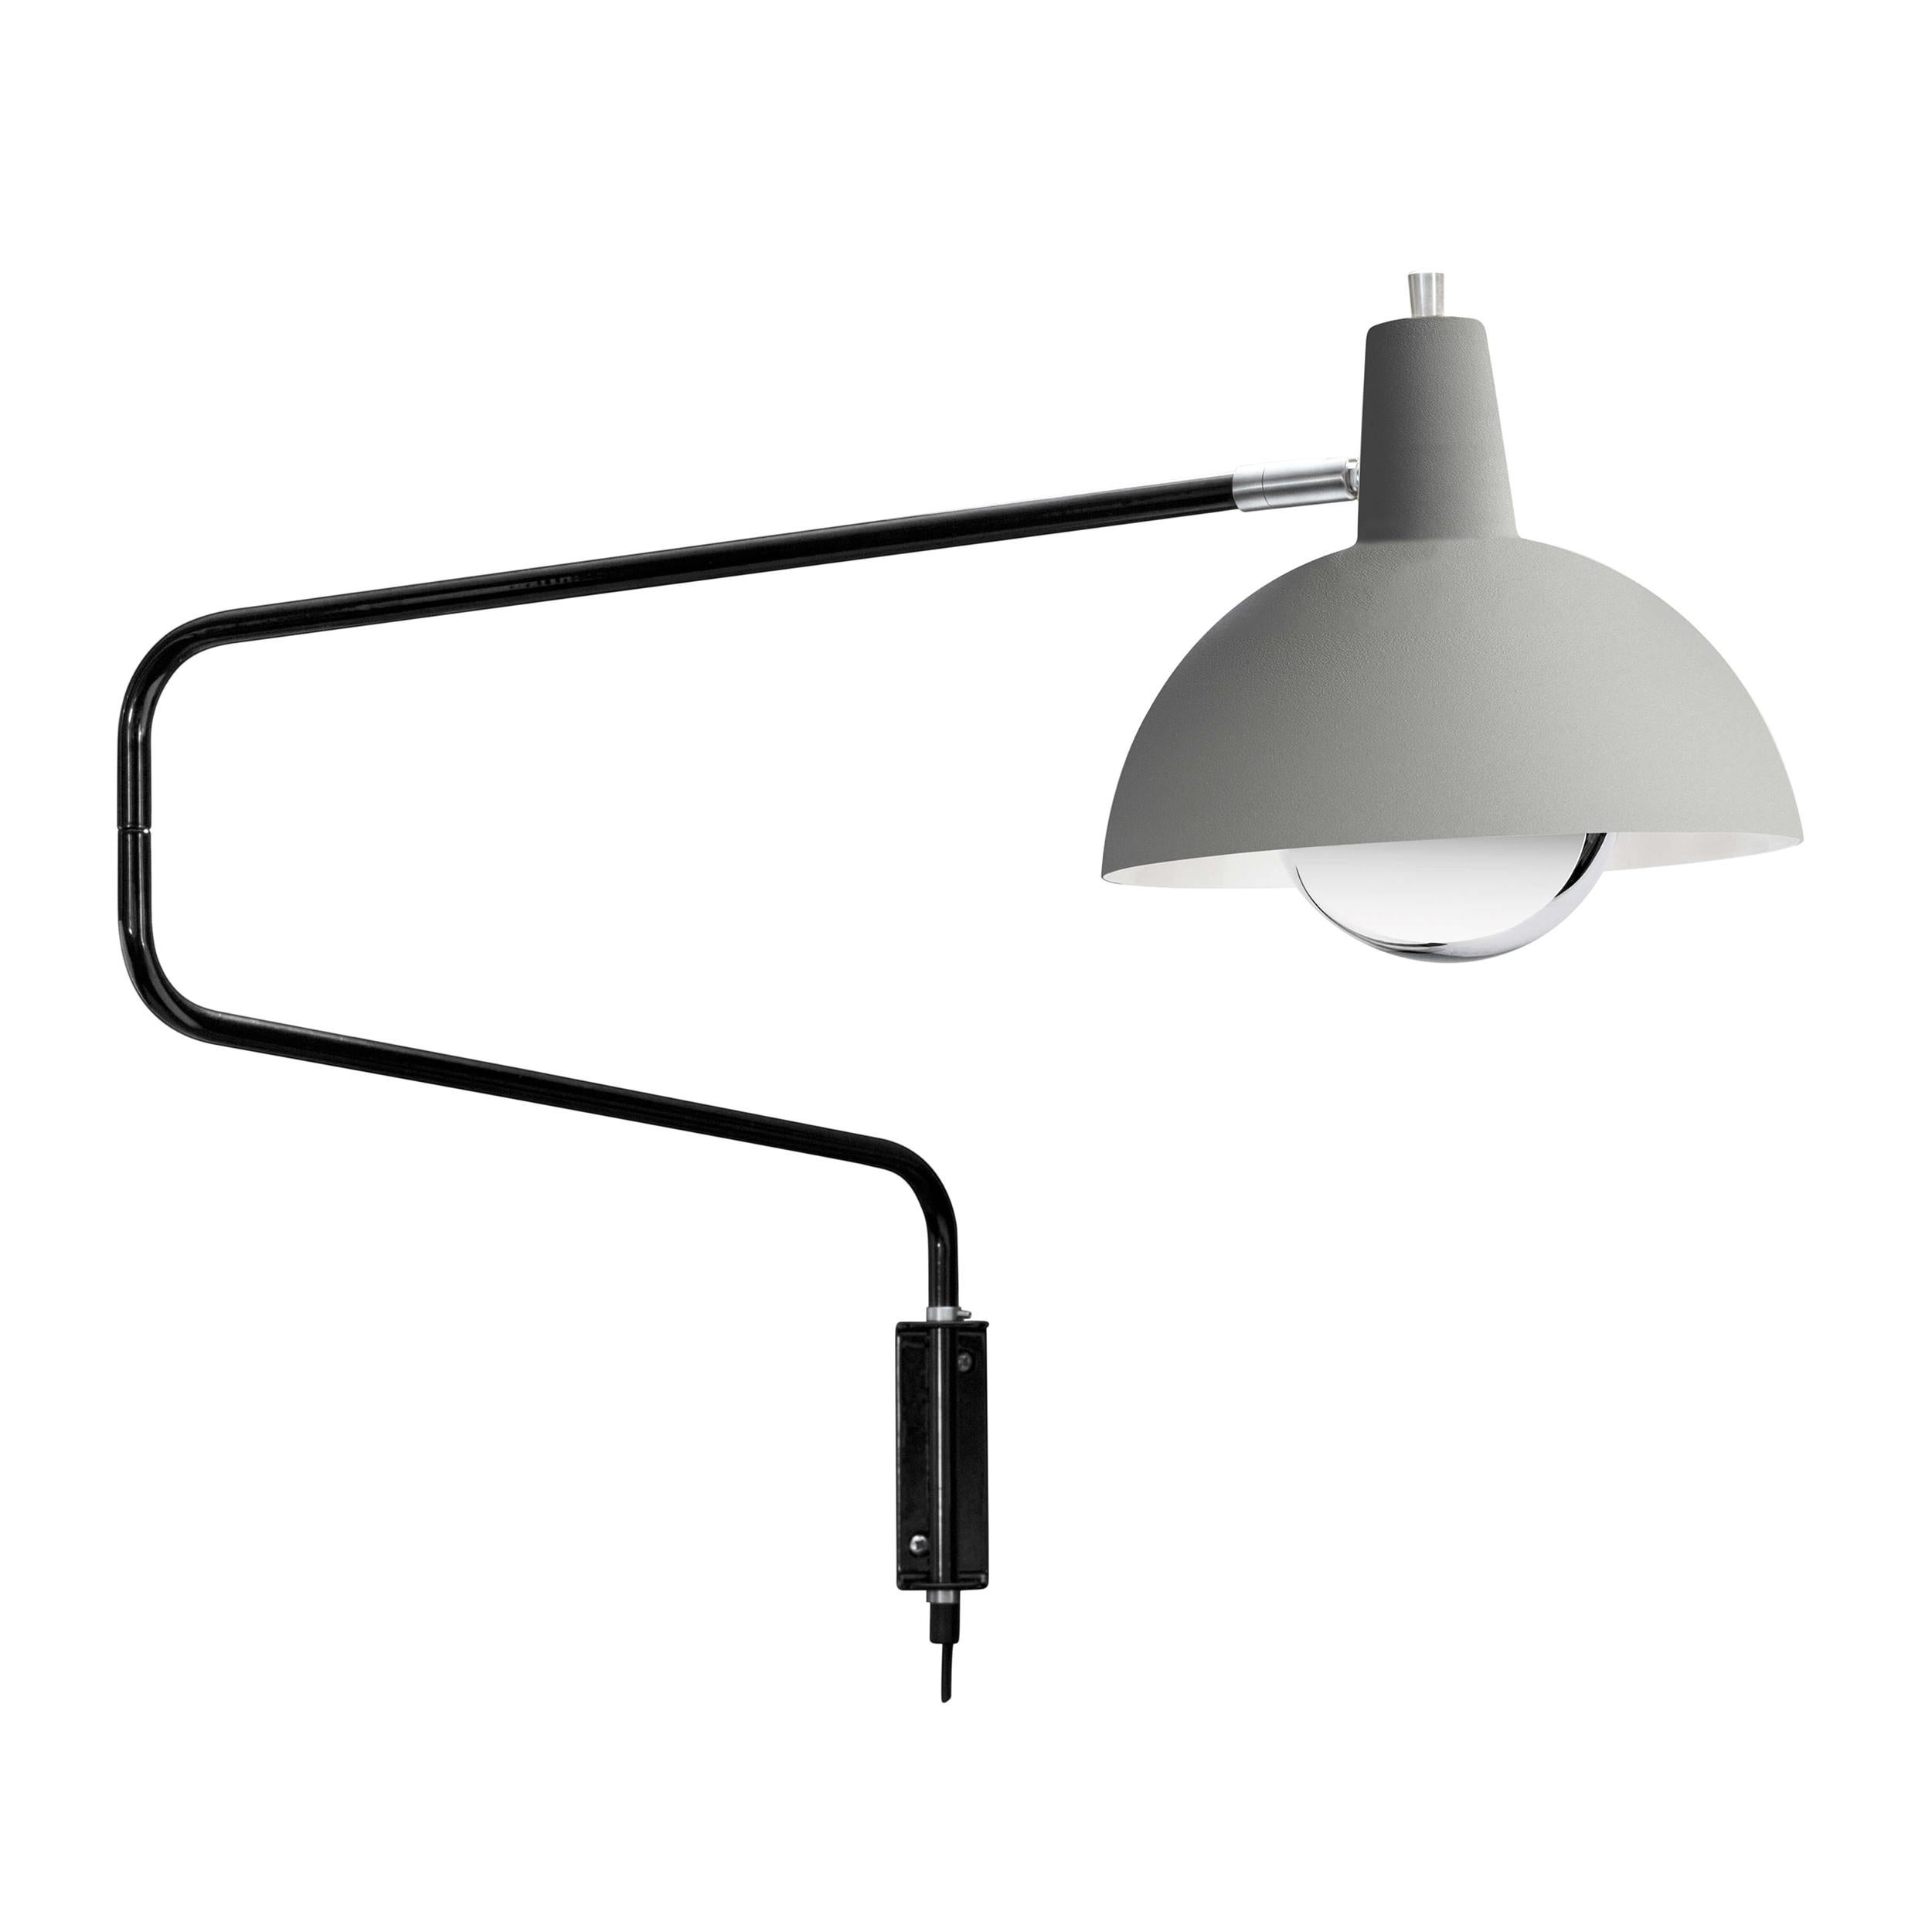 J.J.M. Hoogervorst Model 1702 'Paperclip' wall light for Anvia in White. Hoogervorst's most popular 1950s design, this lamp remains a highly sought after icon of Dutch modernism. The 'elbow' arm when folded measures 27.5 in. wide, but can be